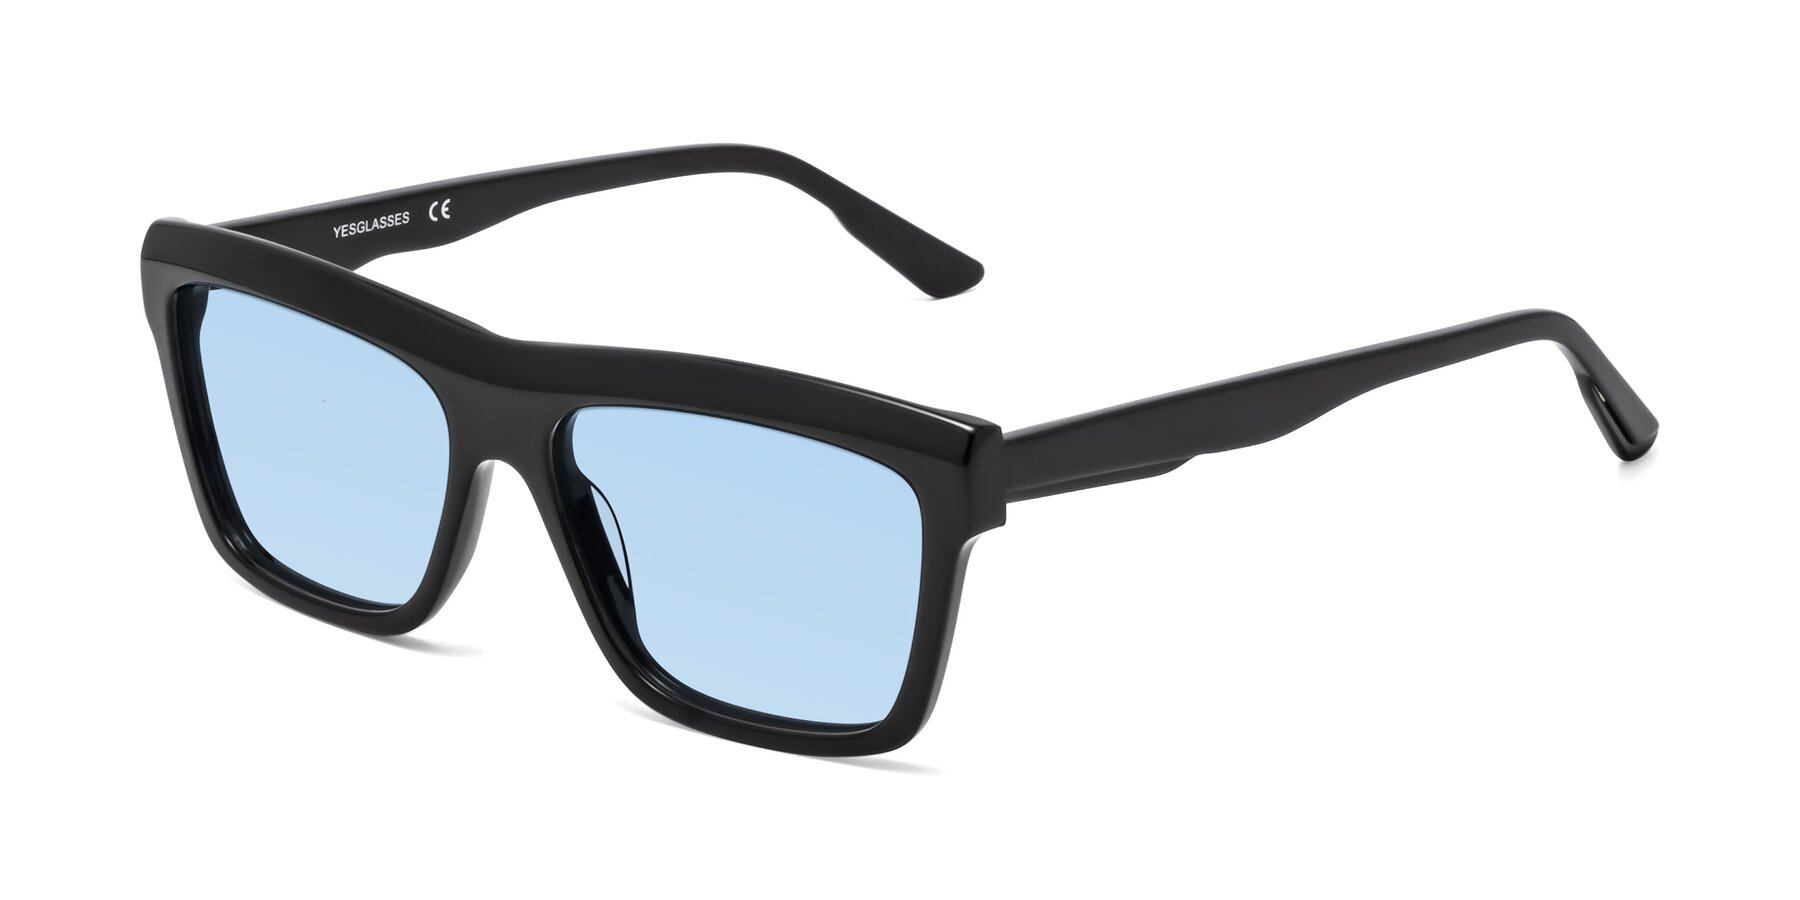 Angle of 1481 in Black with Light Blue Tinted Lenses